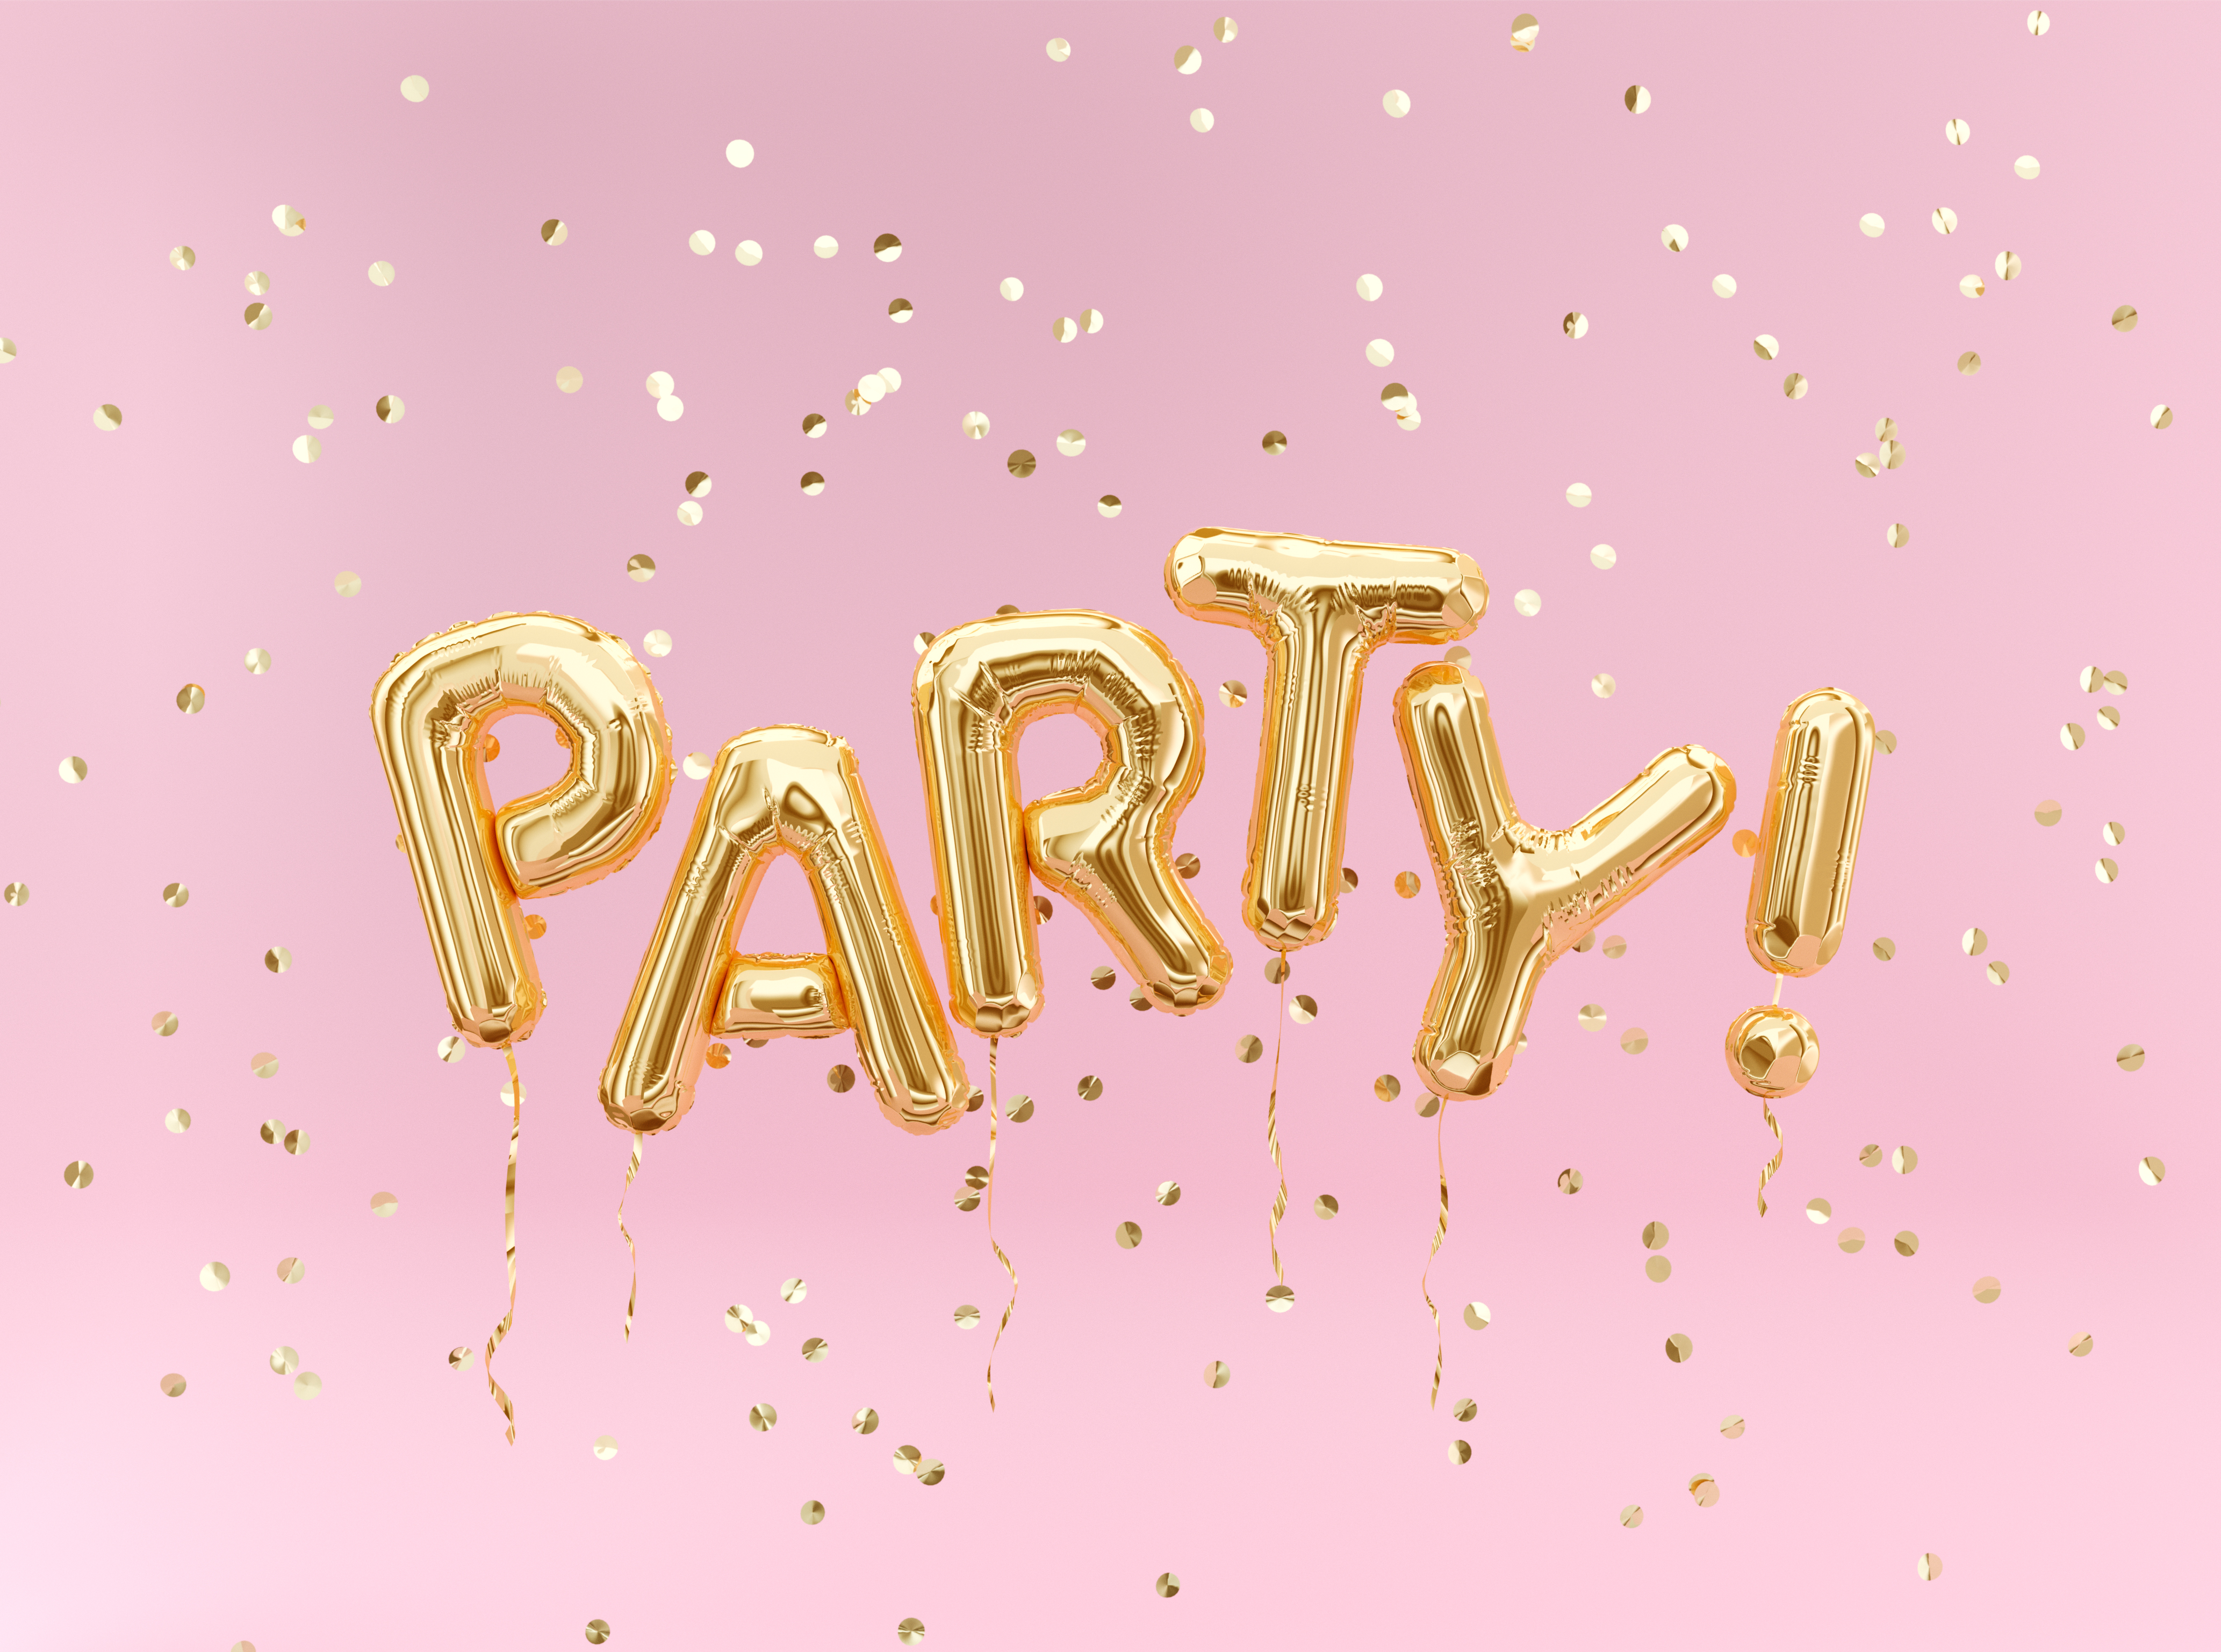 A golden confetti background on floating foil balloons spelling out “Party!”